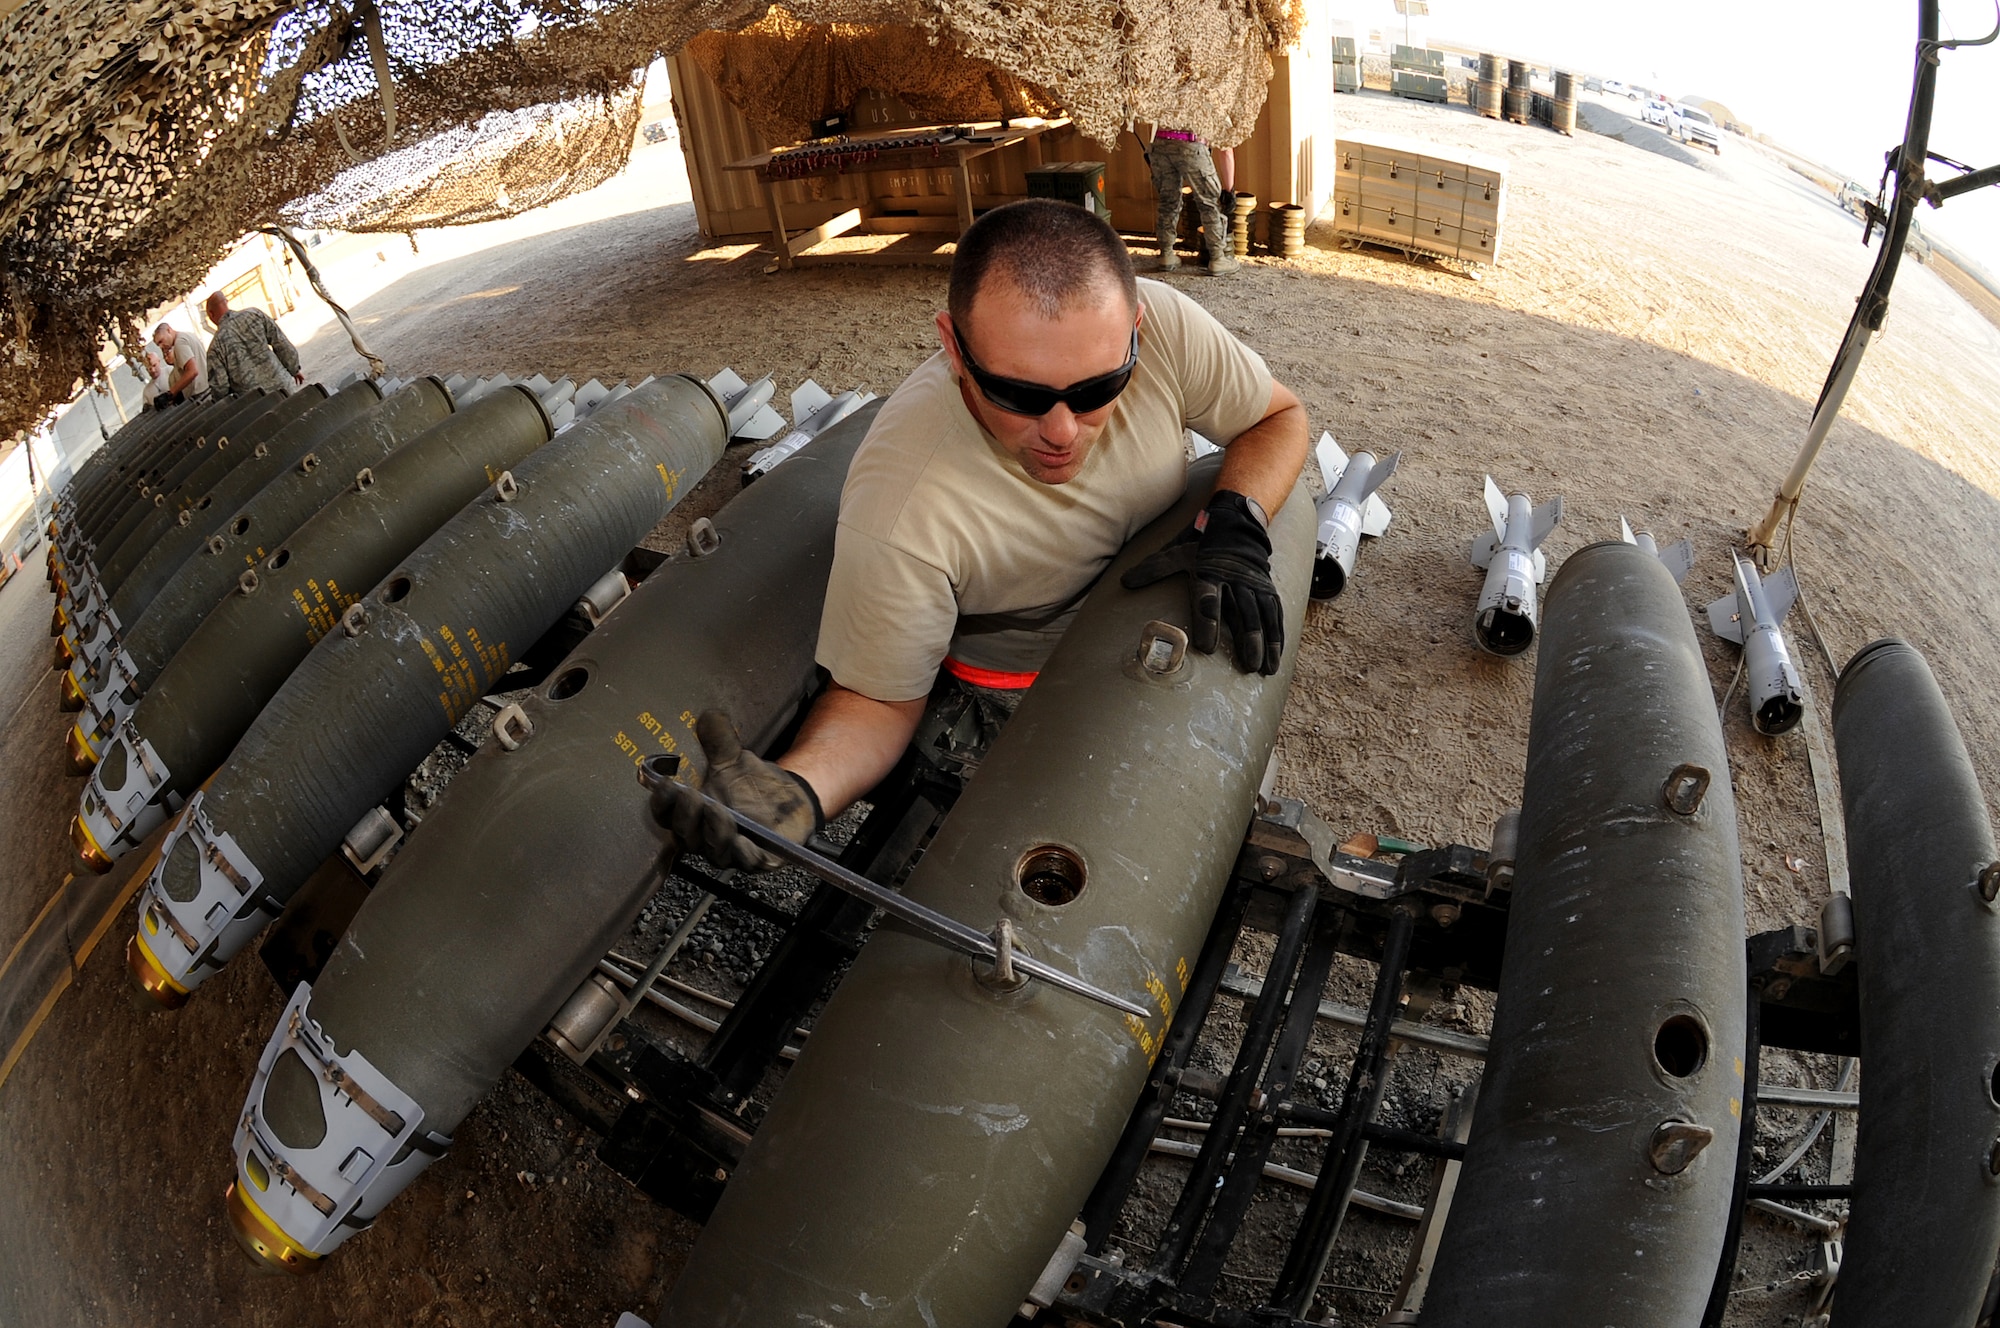 Master Sgt. Adam, NCO-in-charge of conventional maintenance, lines up bomb lugs on MK-82 munitions Dec. 21, 2014, in Southwest Asia, to ensure they are prepared to sync up with aircraft racks during installation.  Adam, deployed from Seymour Johnson Air Force Base, N.C., has been an Ammo troop for 14 years.  (U.S. Air Force photo/Senior Master Sgt. Carrie Hinson)